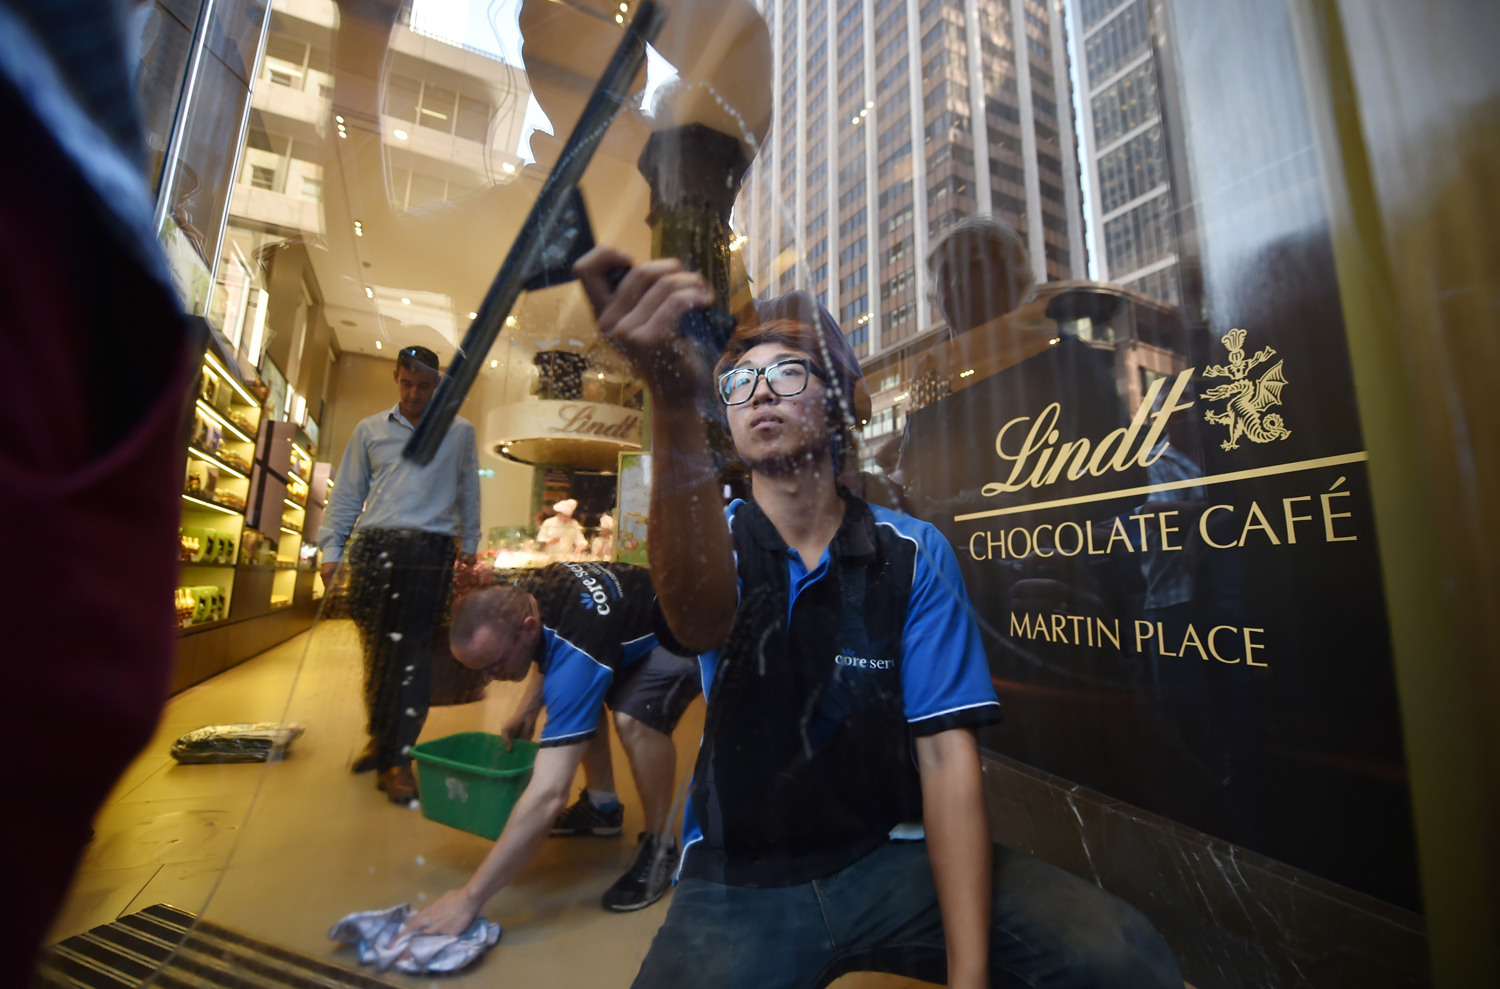 A staff member cleans the front door windows ahead of the re-opening of the Lindt Cafe at Martin Place in Sydney on March 20, 2015. (Peter Parks — AFP/Getty Images)